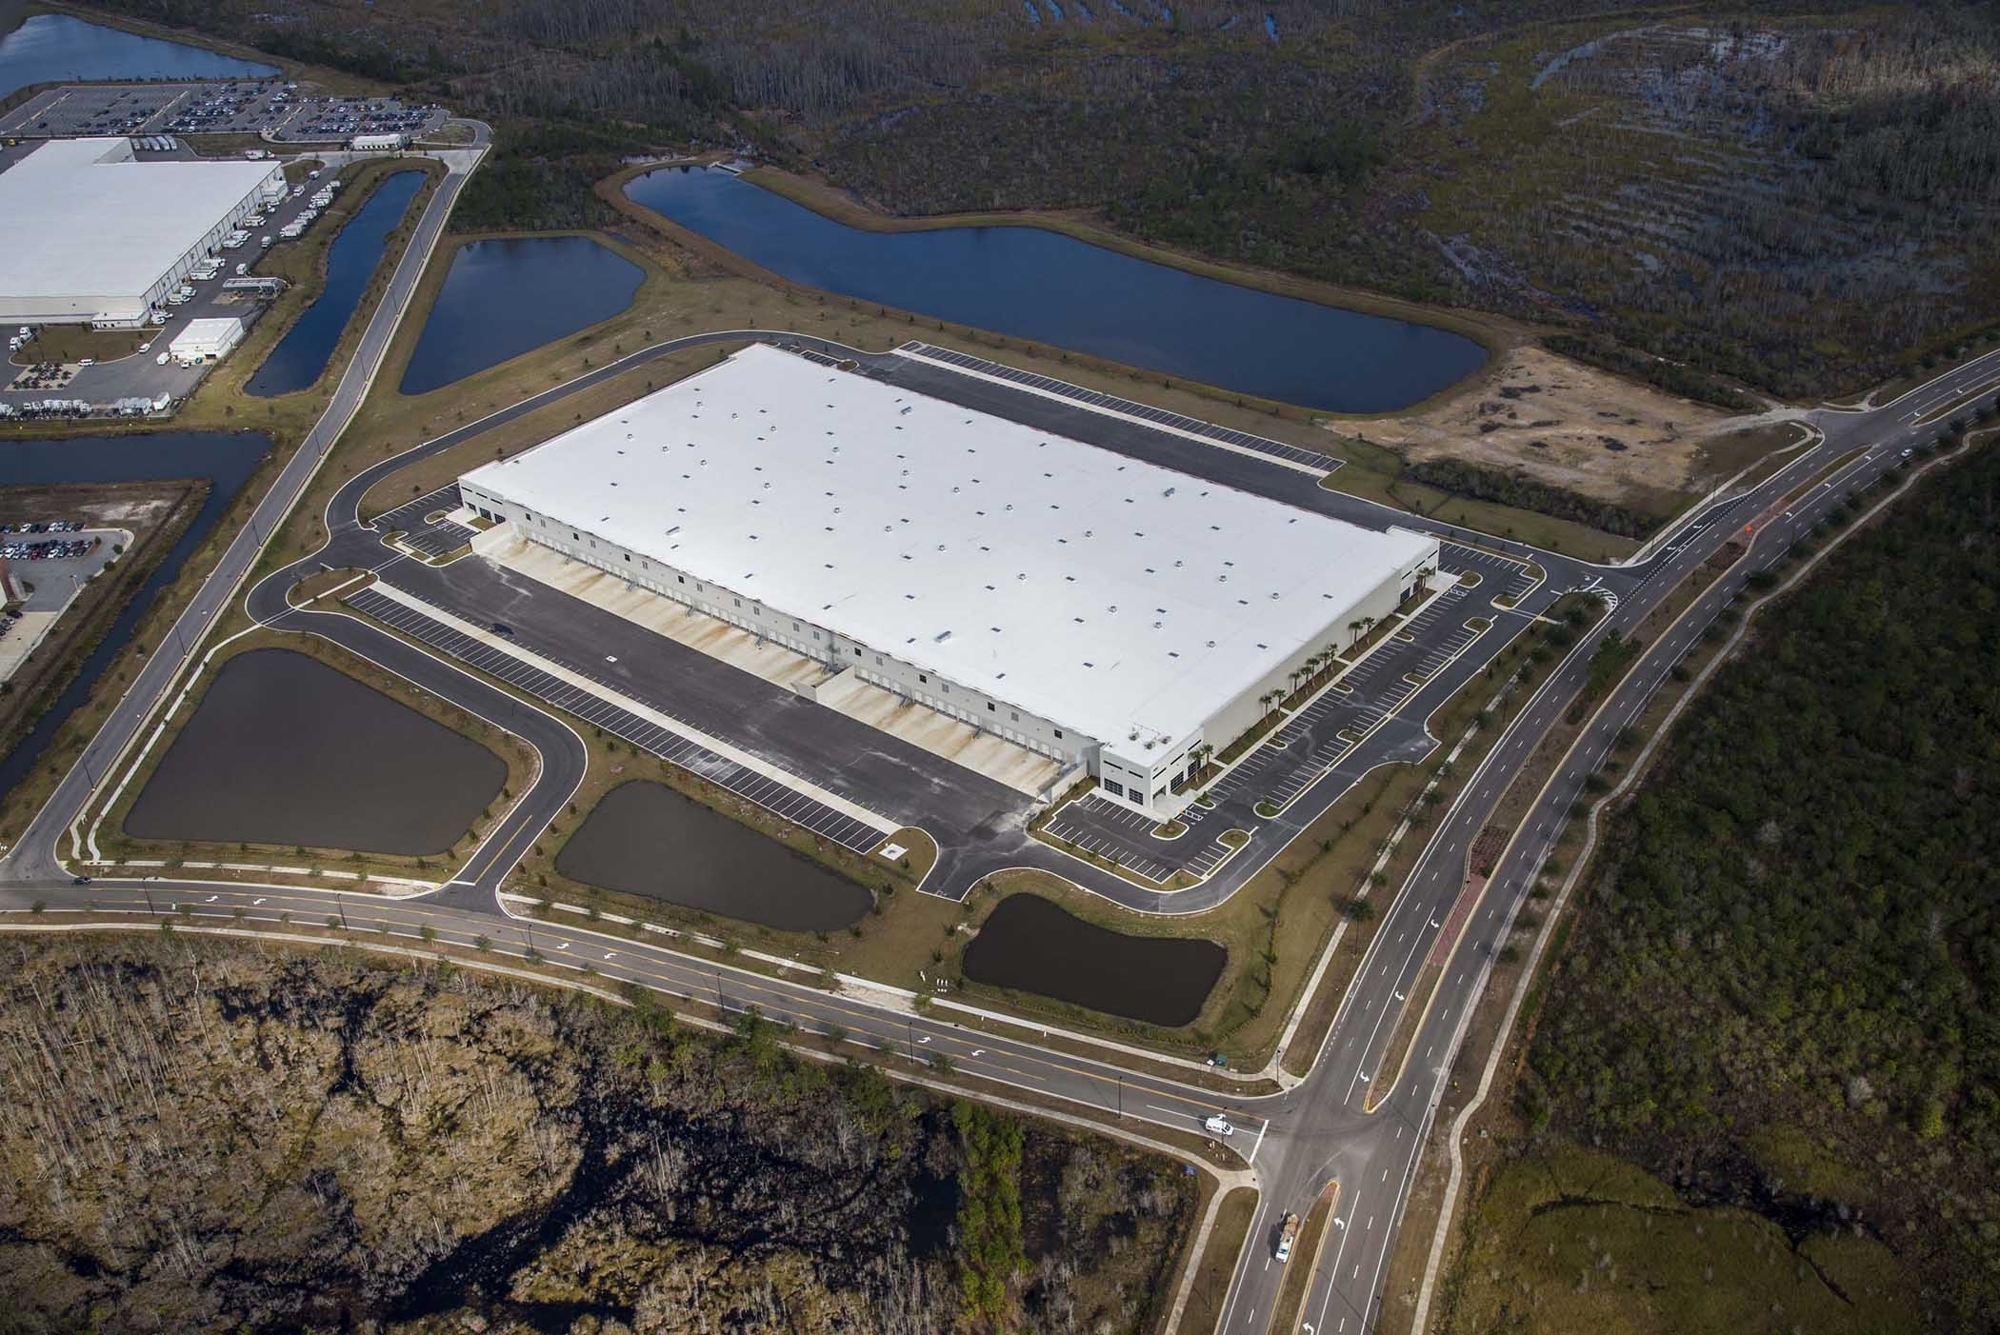 JinkoSolar leases 285,652 square feet in a 407,435-square-foot building in AllianceFlorida at Cecil Commerce Center in West Jacksonville.